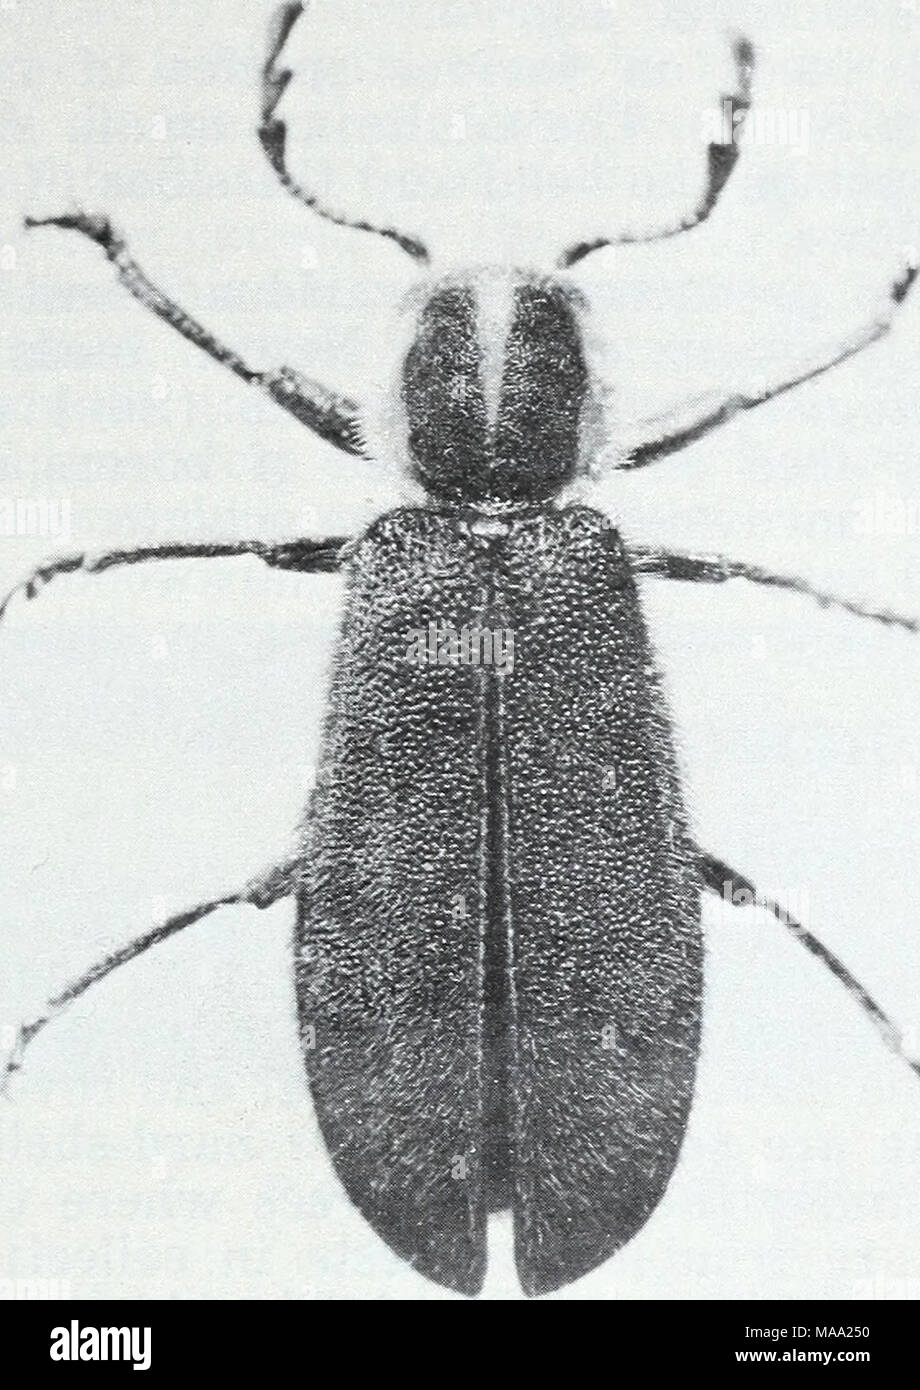 . Eastern forest insects . F-519949 Figure 45.—Adult of Chari- essa pilosa, a predator of wood-boring larvae. Enoclerus nigripes (Say) larvae feed on bark beetles in coni- fers, and on wood borers in hardwoods. Adults are brightly col- ored and about 8 to 12 mm. long. The head, thorax, base of the wing covers, and the undersides are dull red; the remainder is black except for two yellowish cross bars on the wing covers. The larvae are similar to those of Thanasimus dubins. The black- bellied clerid E. lecontei Wolc, has many hosts including bark beetles and weevils in pine, spruce, and juniper Stock Photo